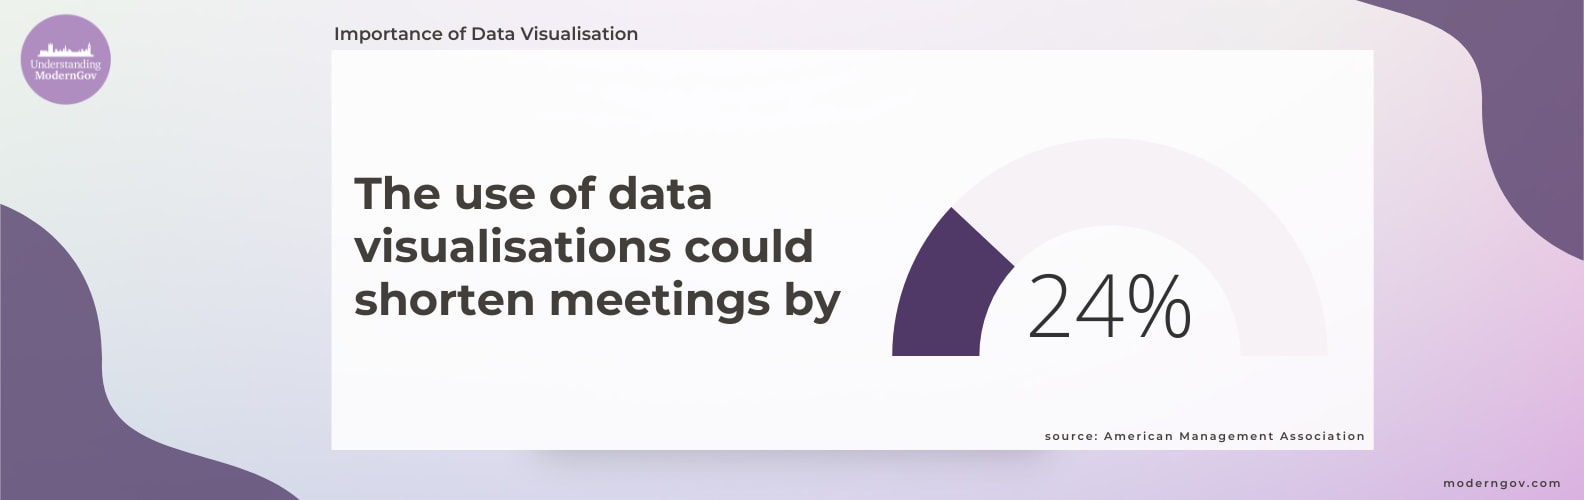 how data visualisations could shorten meetings 